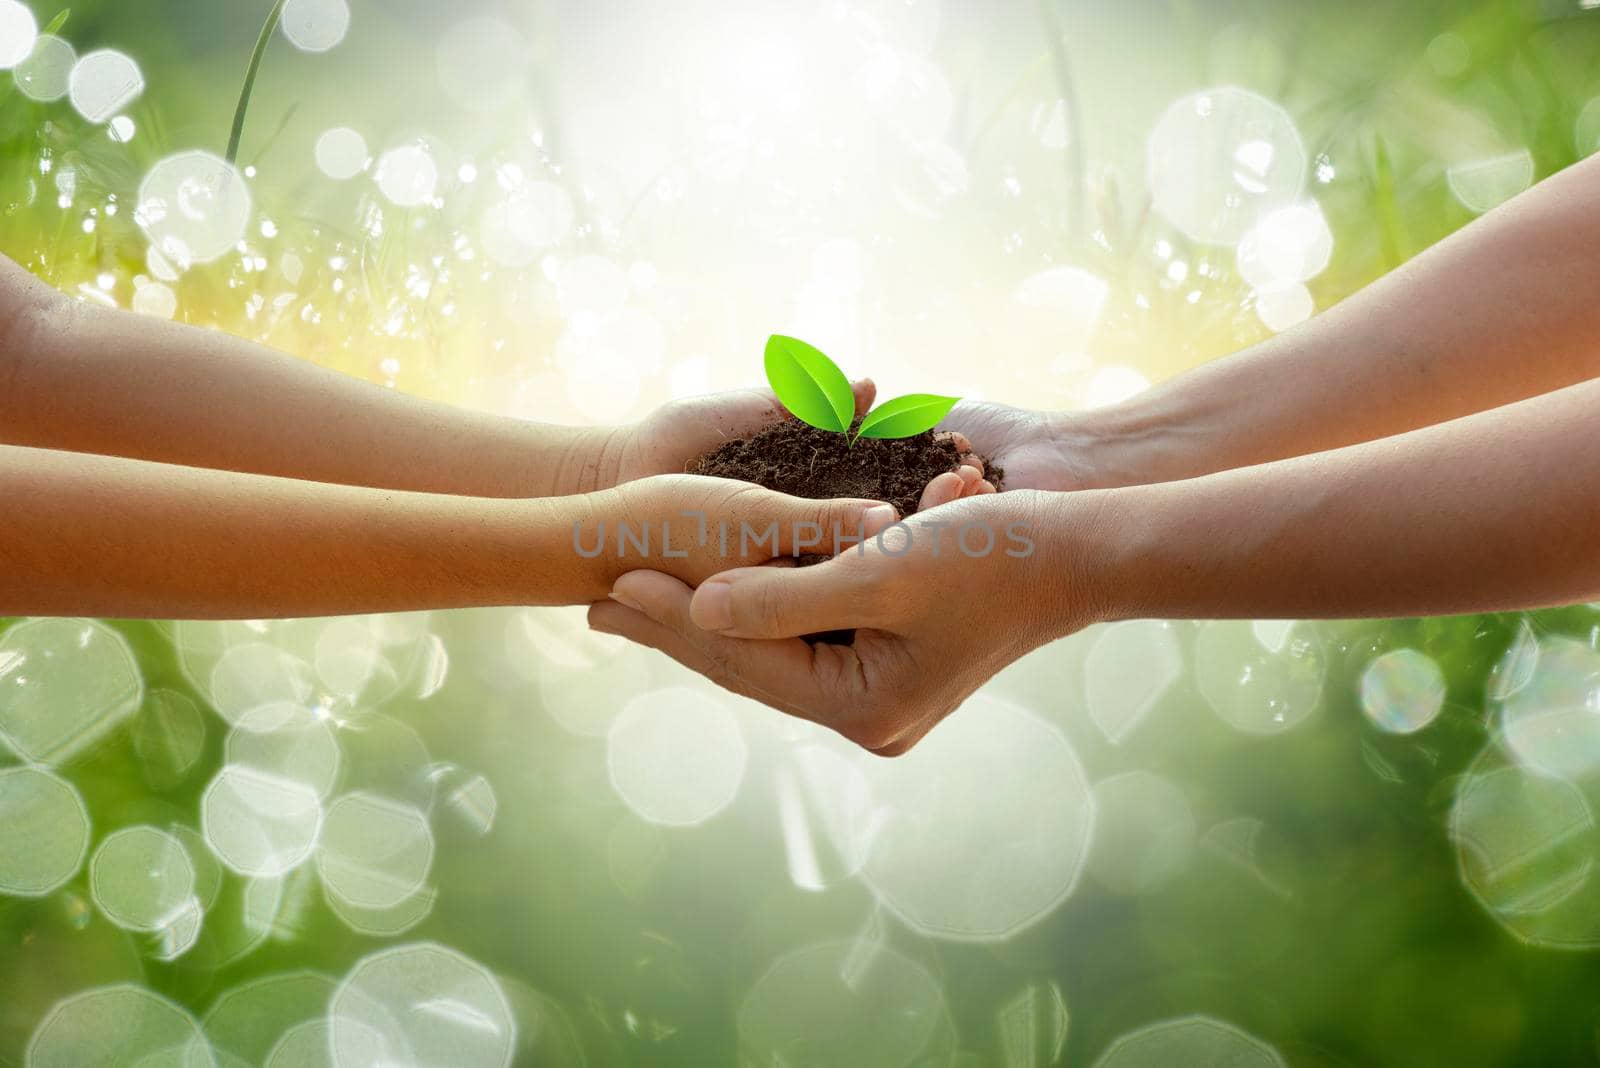 Adults Baby Hand tree environment Earth Day In the hands of trees growing seedlings. Bokeh green Background Female hand holding tree on nature field grass Forest conservation concept